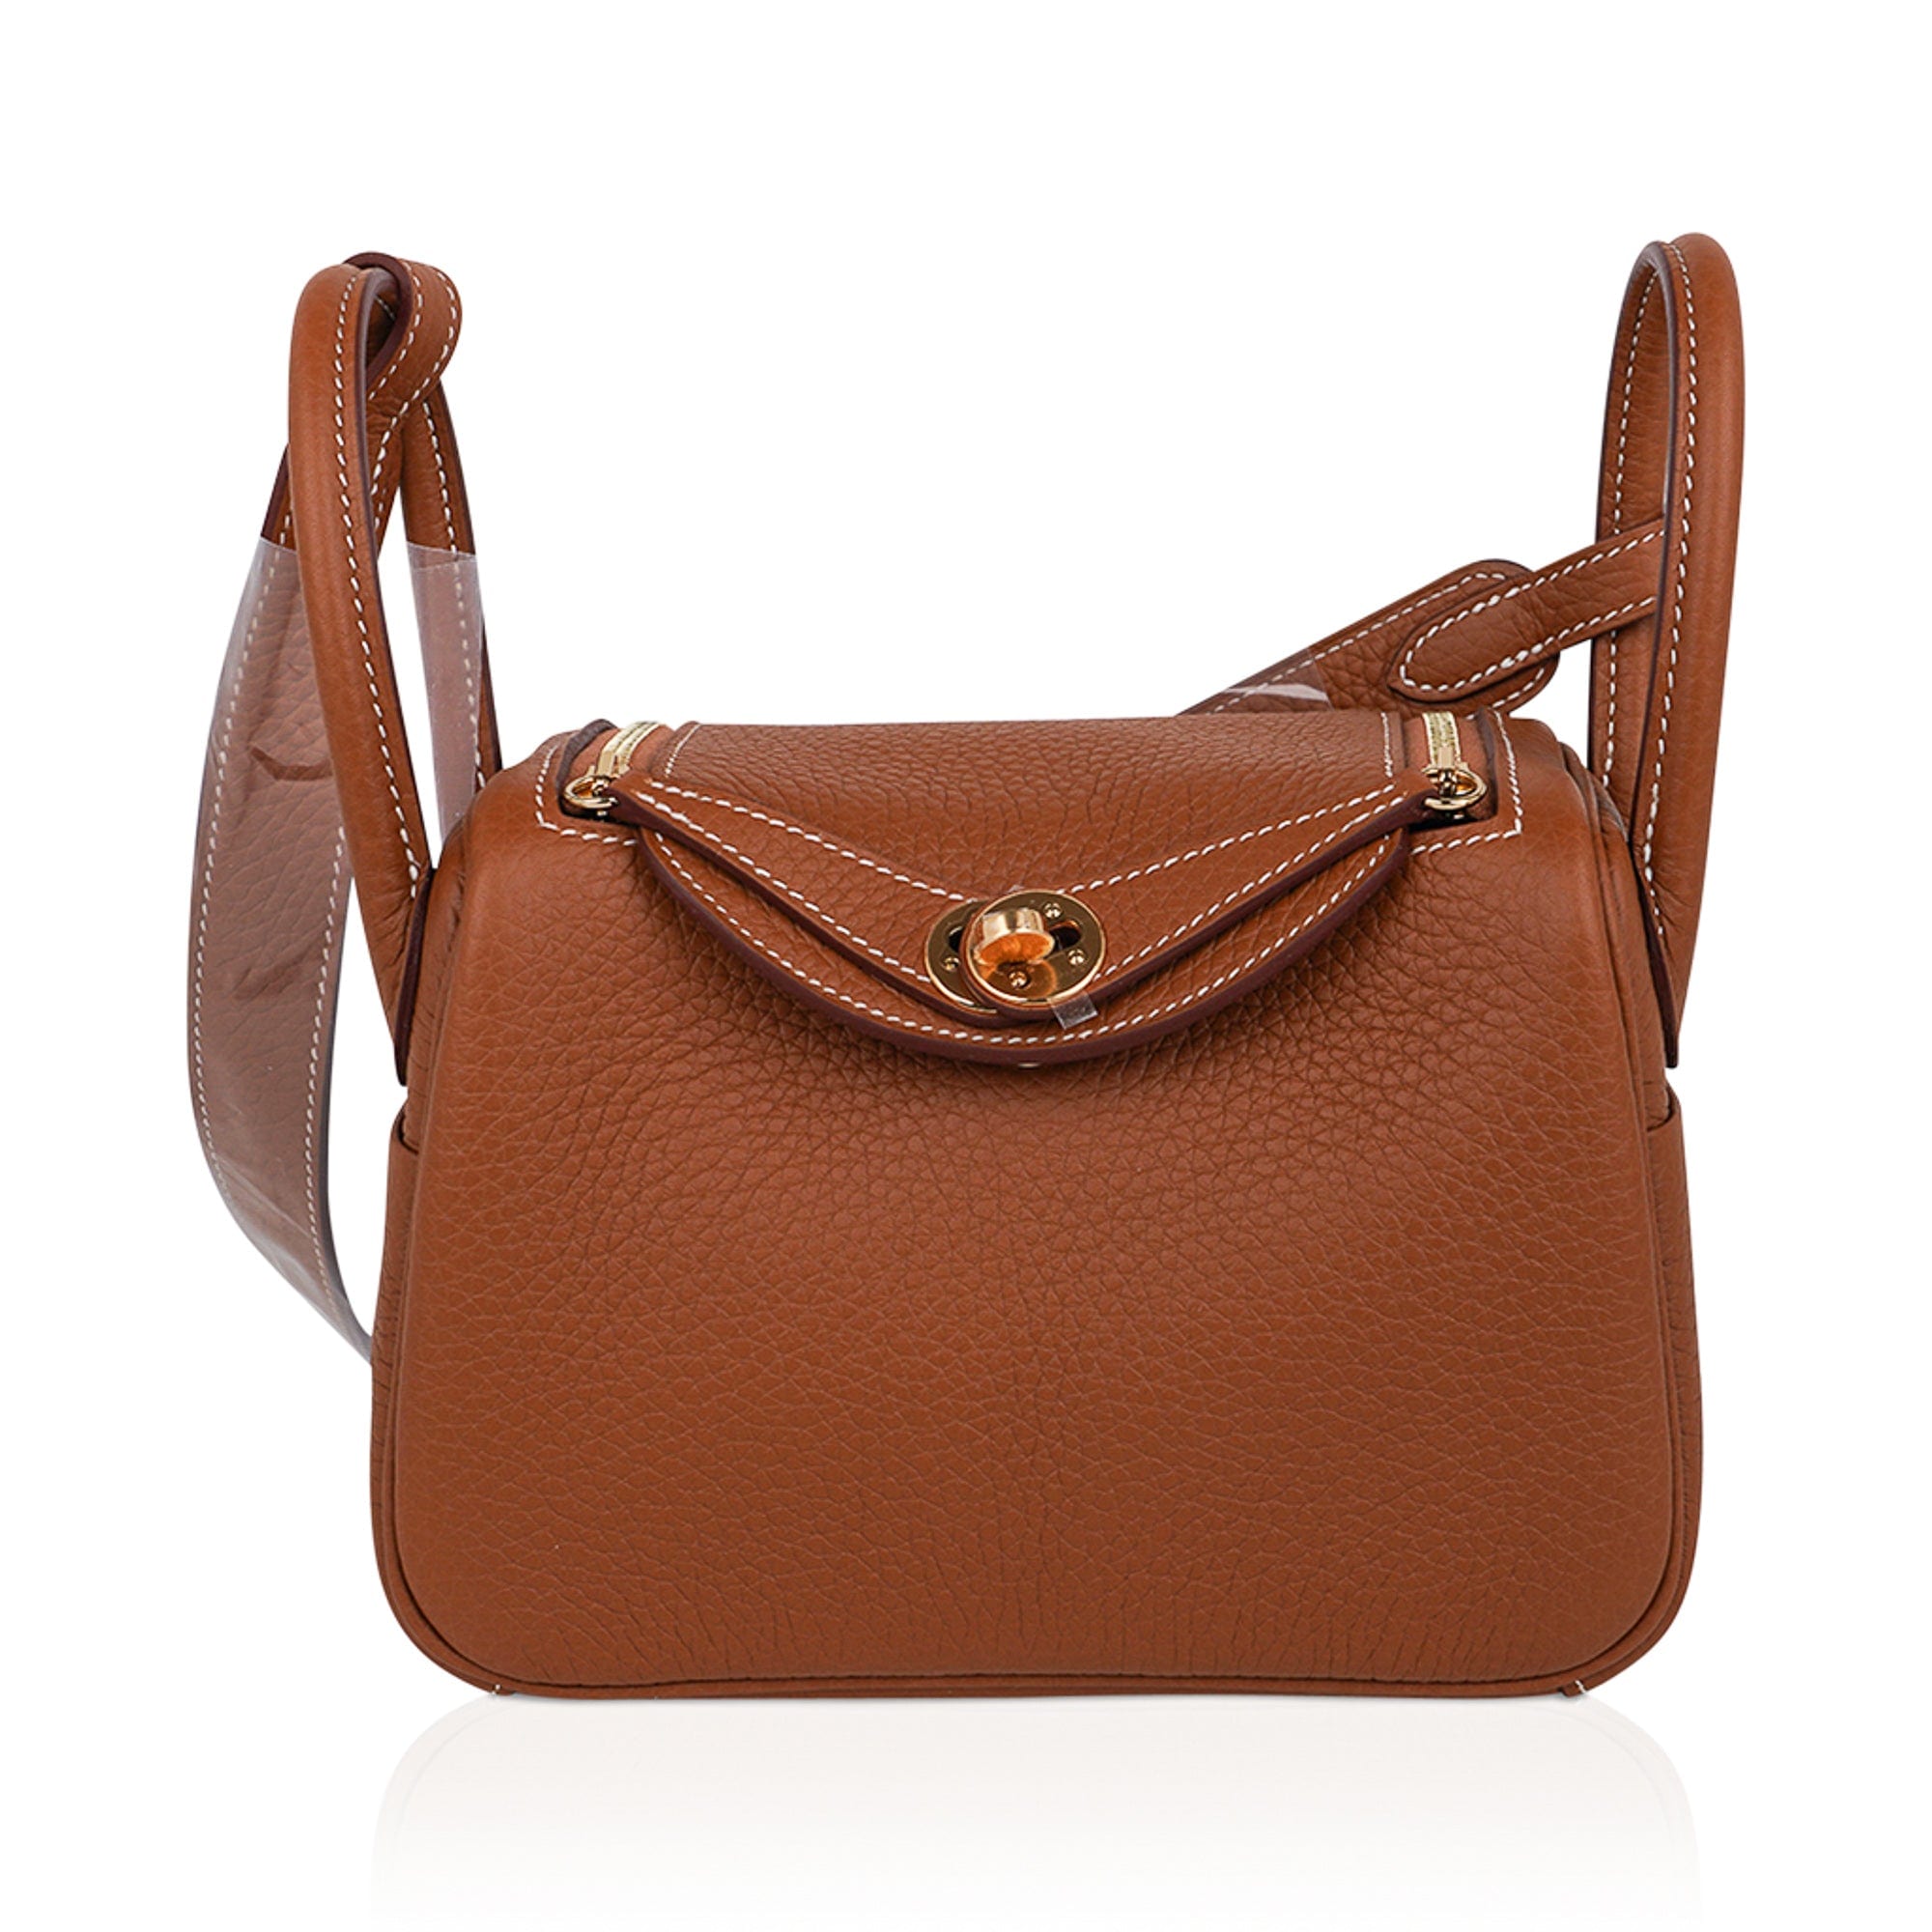 https://mightychic.com/wp-content/uploads/2023/12/hermes-mini-lindy-gold-bag-for-sale-on-mightychic.jpg